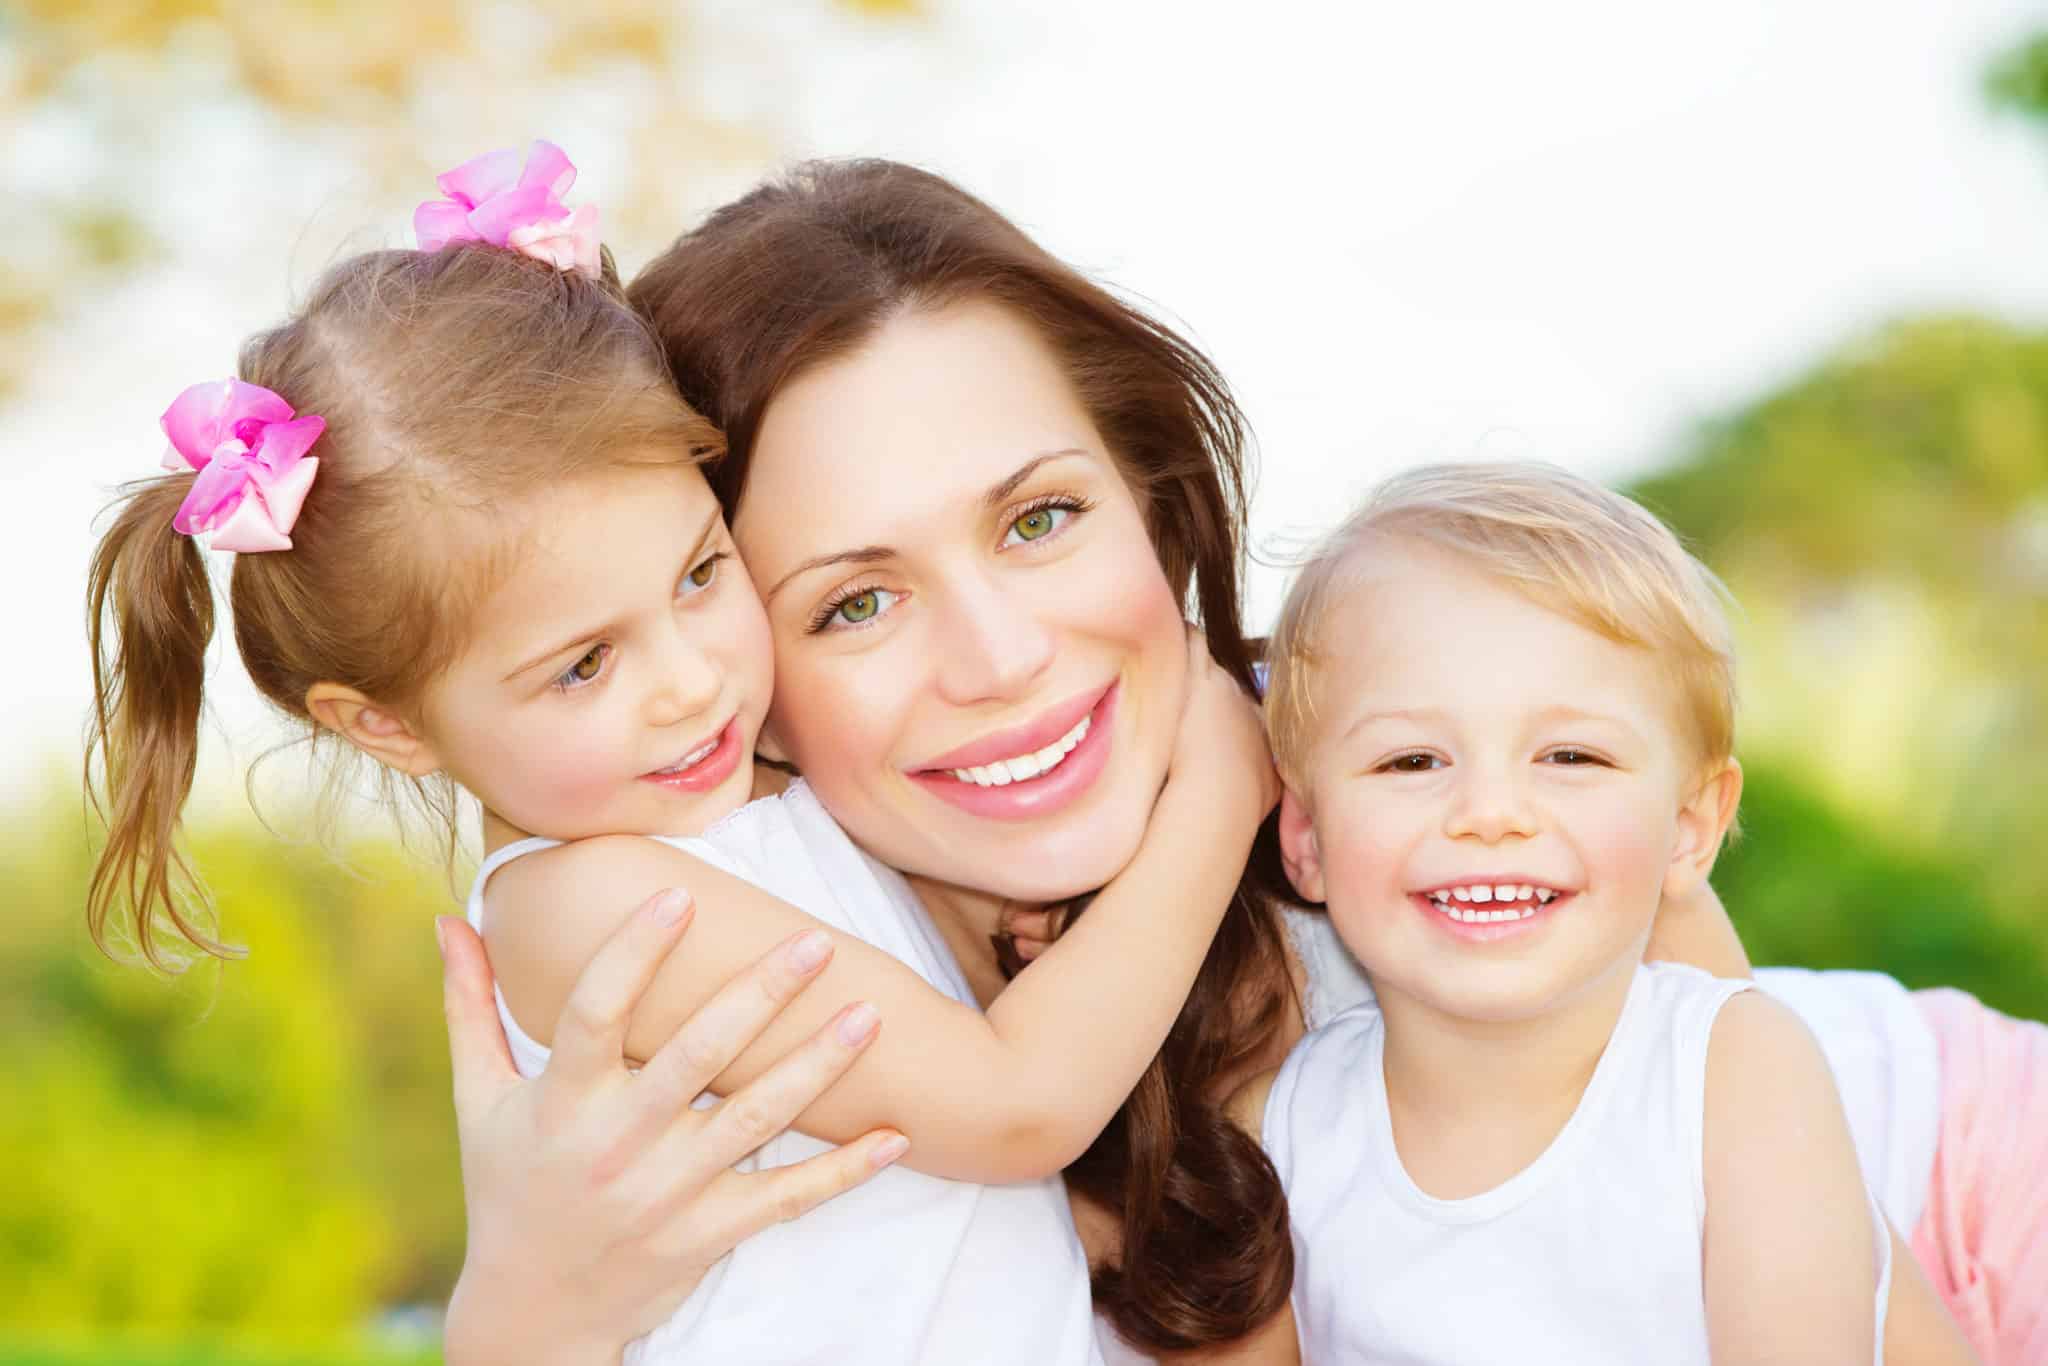 Ditch the mom guilt and take care of you so you can can have even more love to give back to your family.